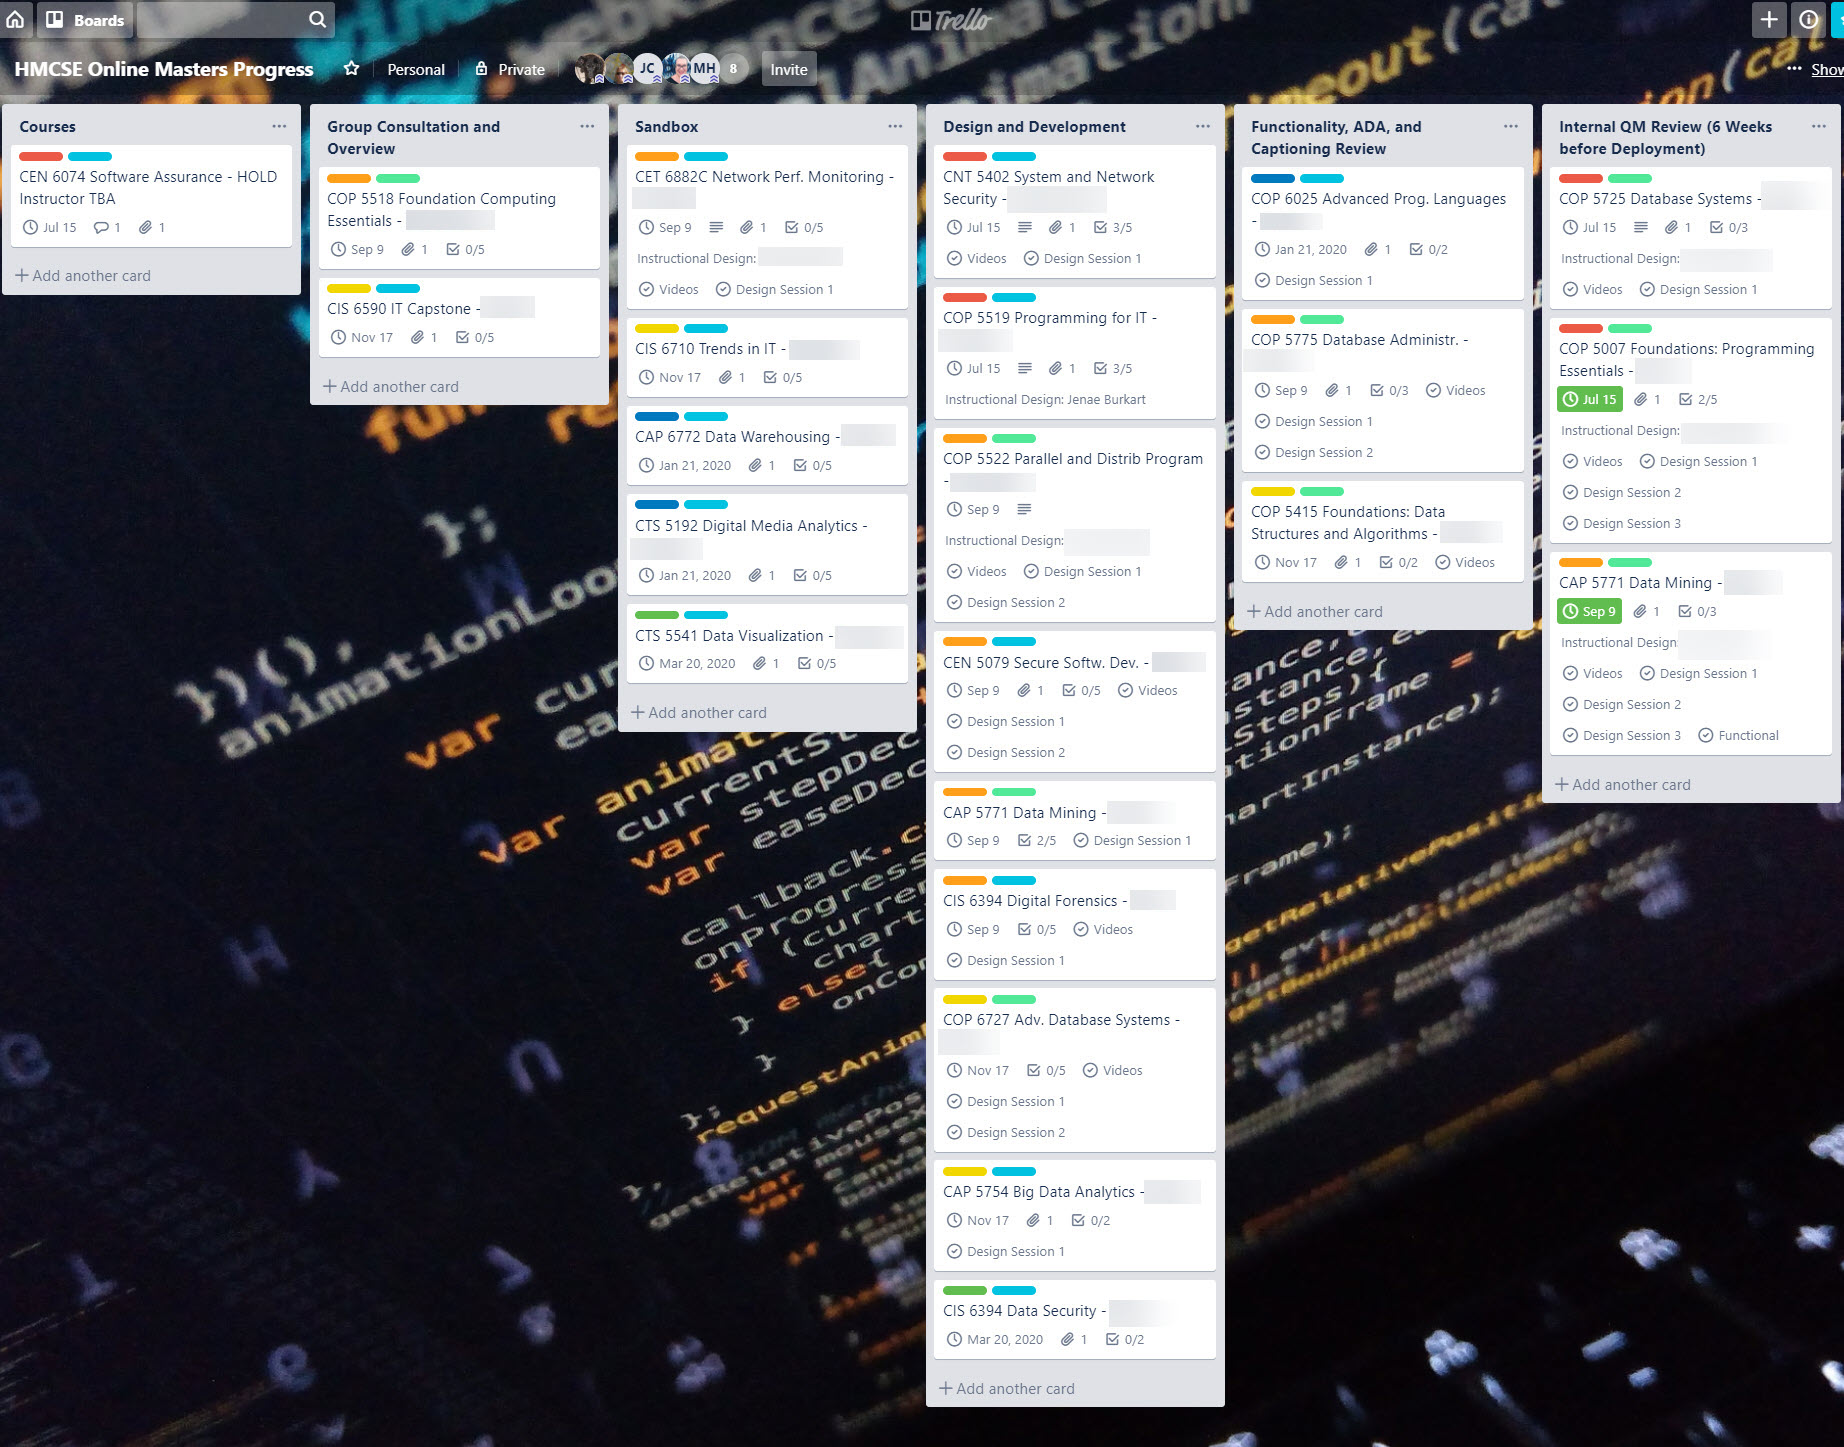 Image of the UWF Trello board for project management